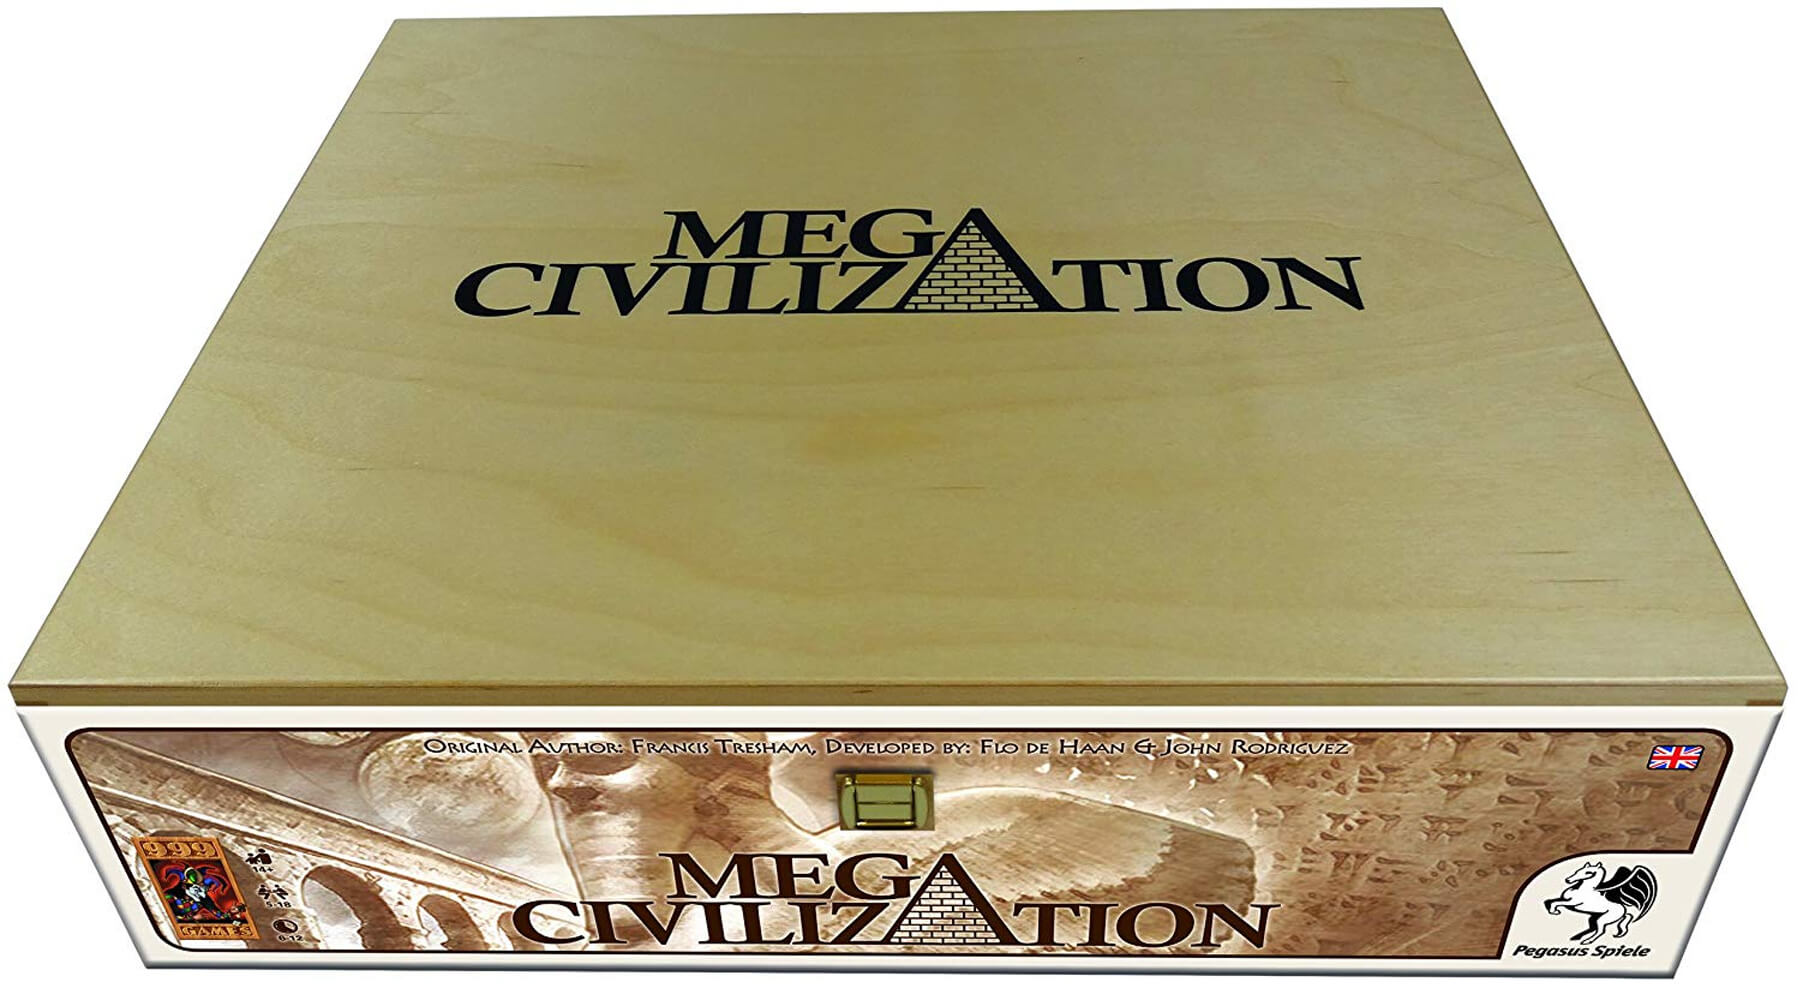 The cover art for the board game Mega Civilization.